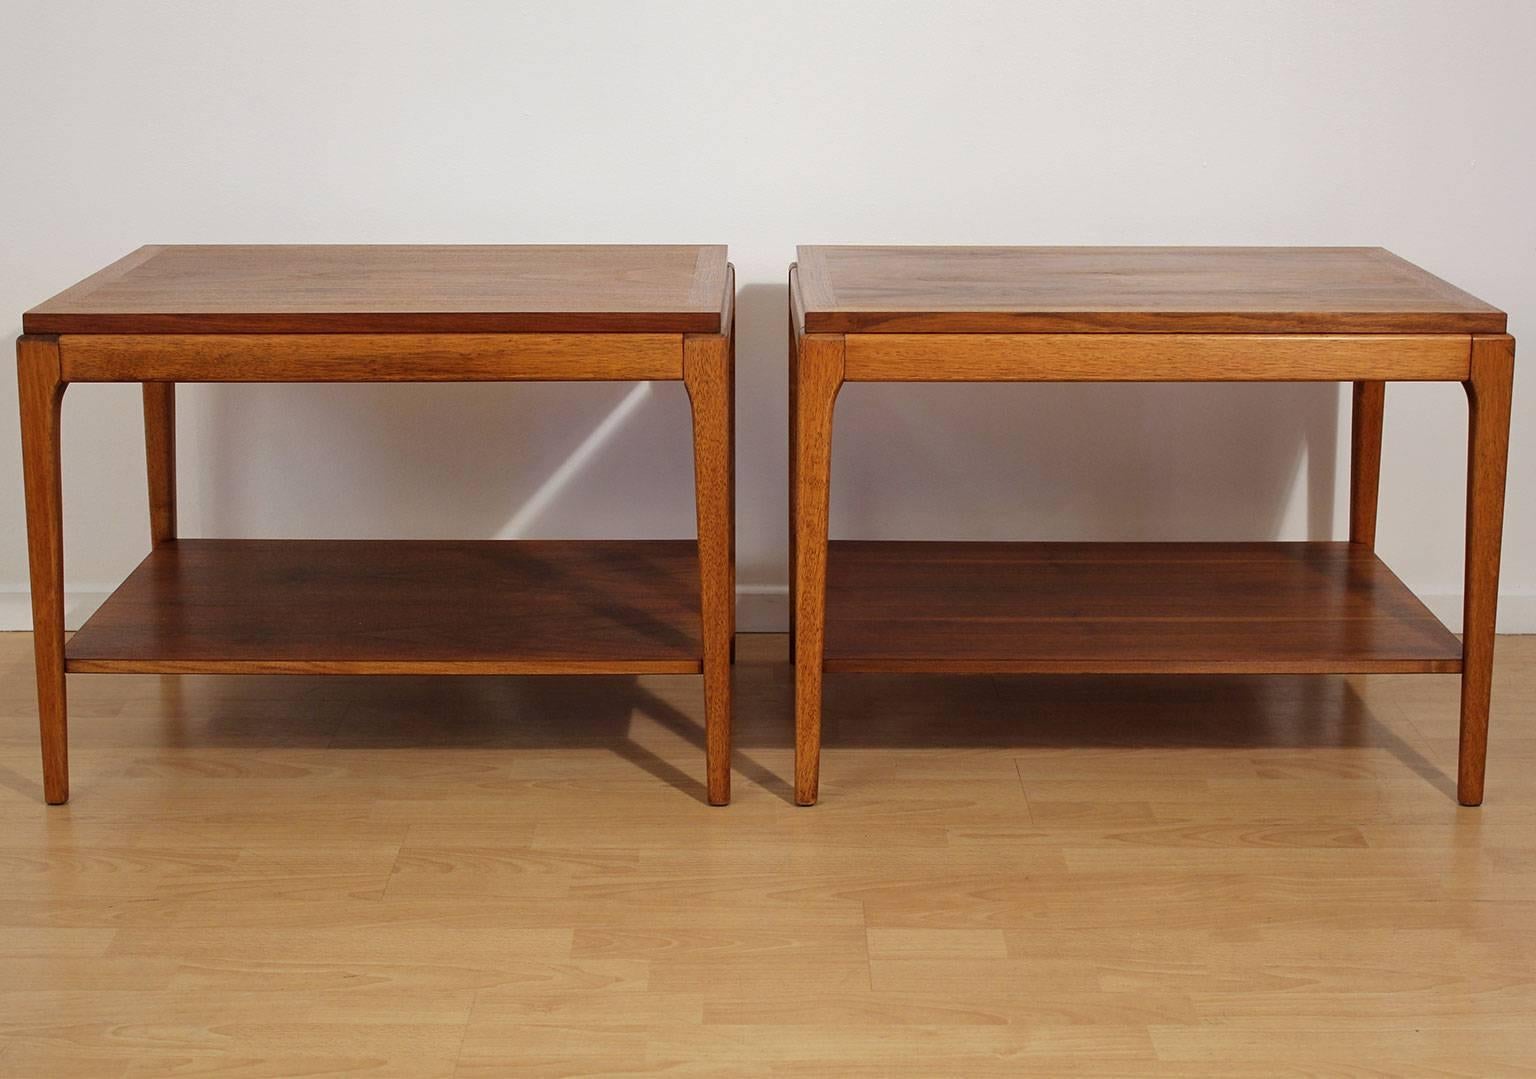 Pair of sculptural modernist Lane end tables, circa 1950s. Made of walnut wood and have been beautifully refinished. Hand oiled to bring out the beauty of the natural wood. Simple modernist design for any setting.